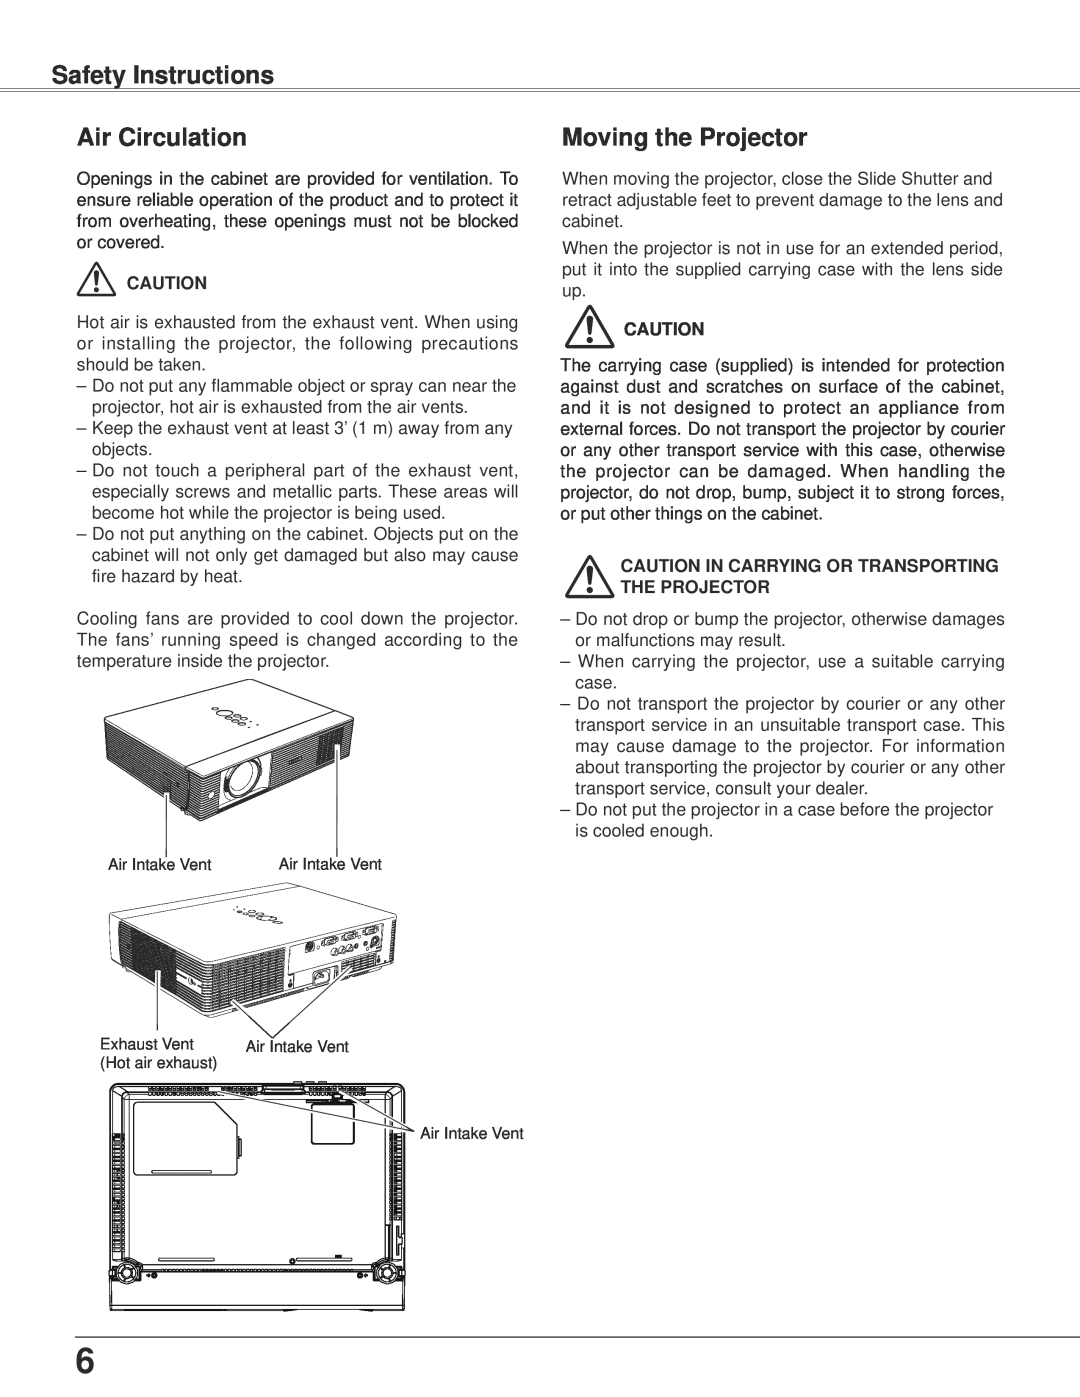 Eiki LC-XB42 Safety Instructions Air Circulation, Moving the Projector, Caution In Carrying Or Transporting The Projector 